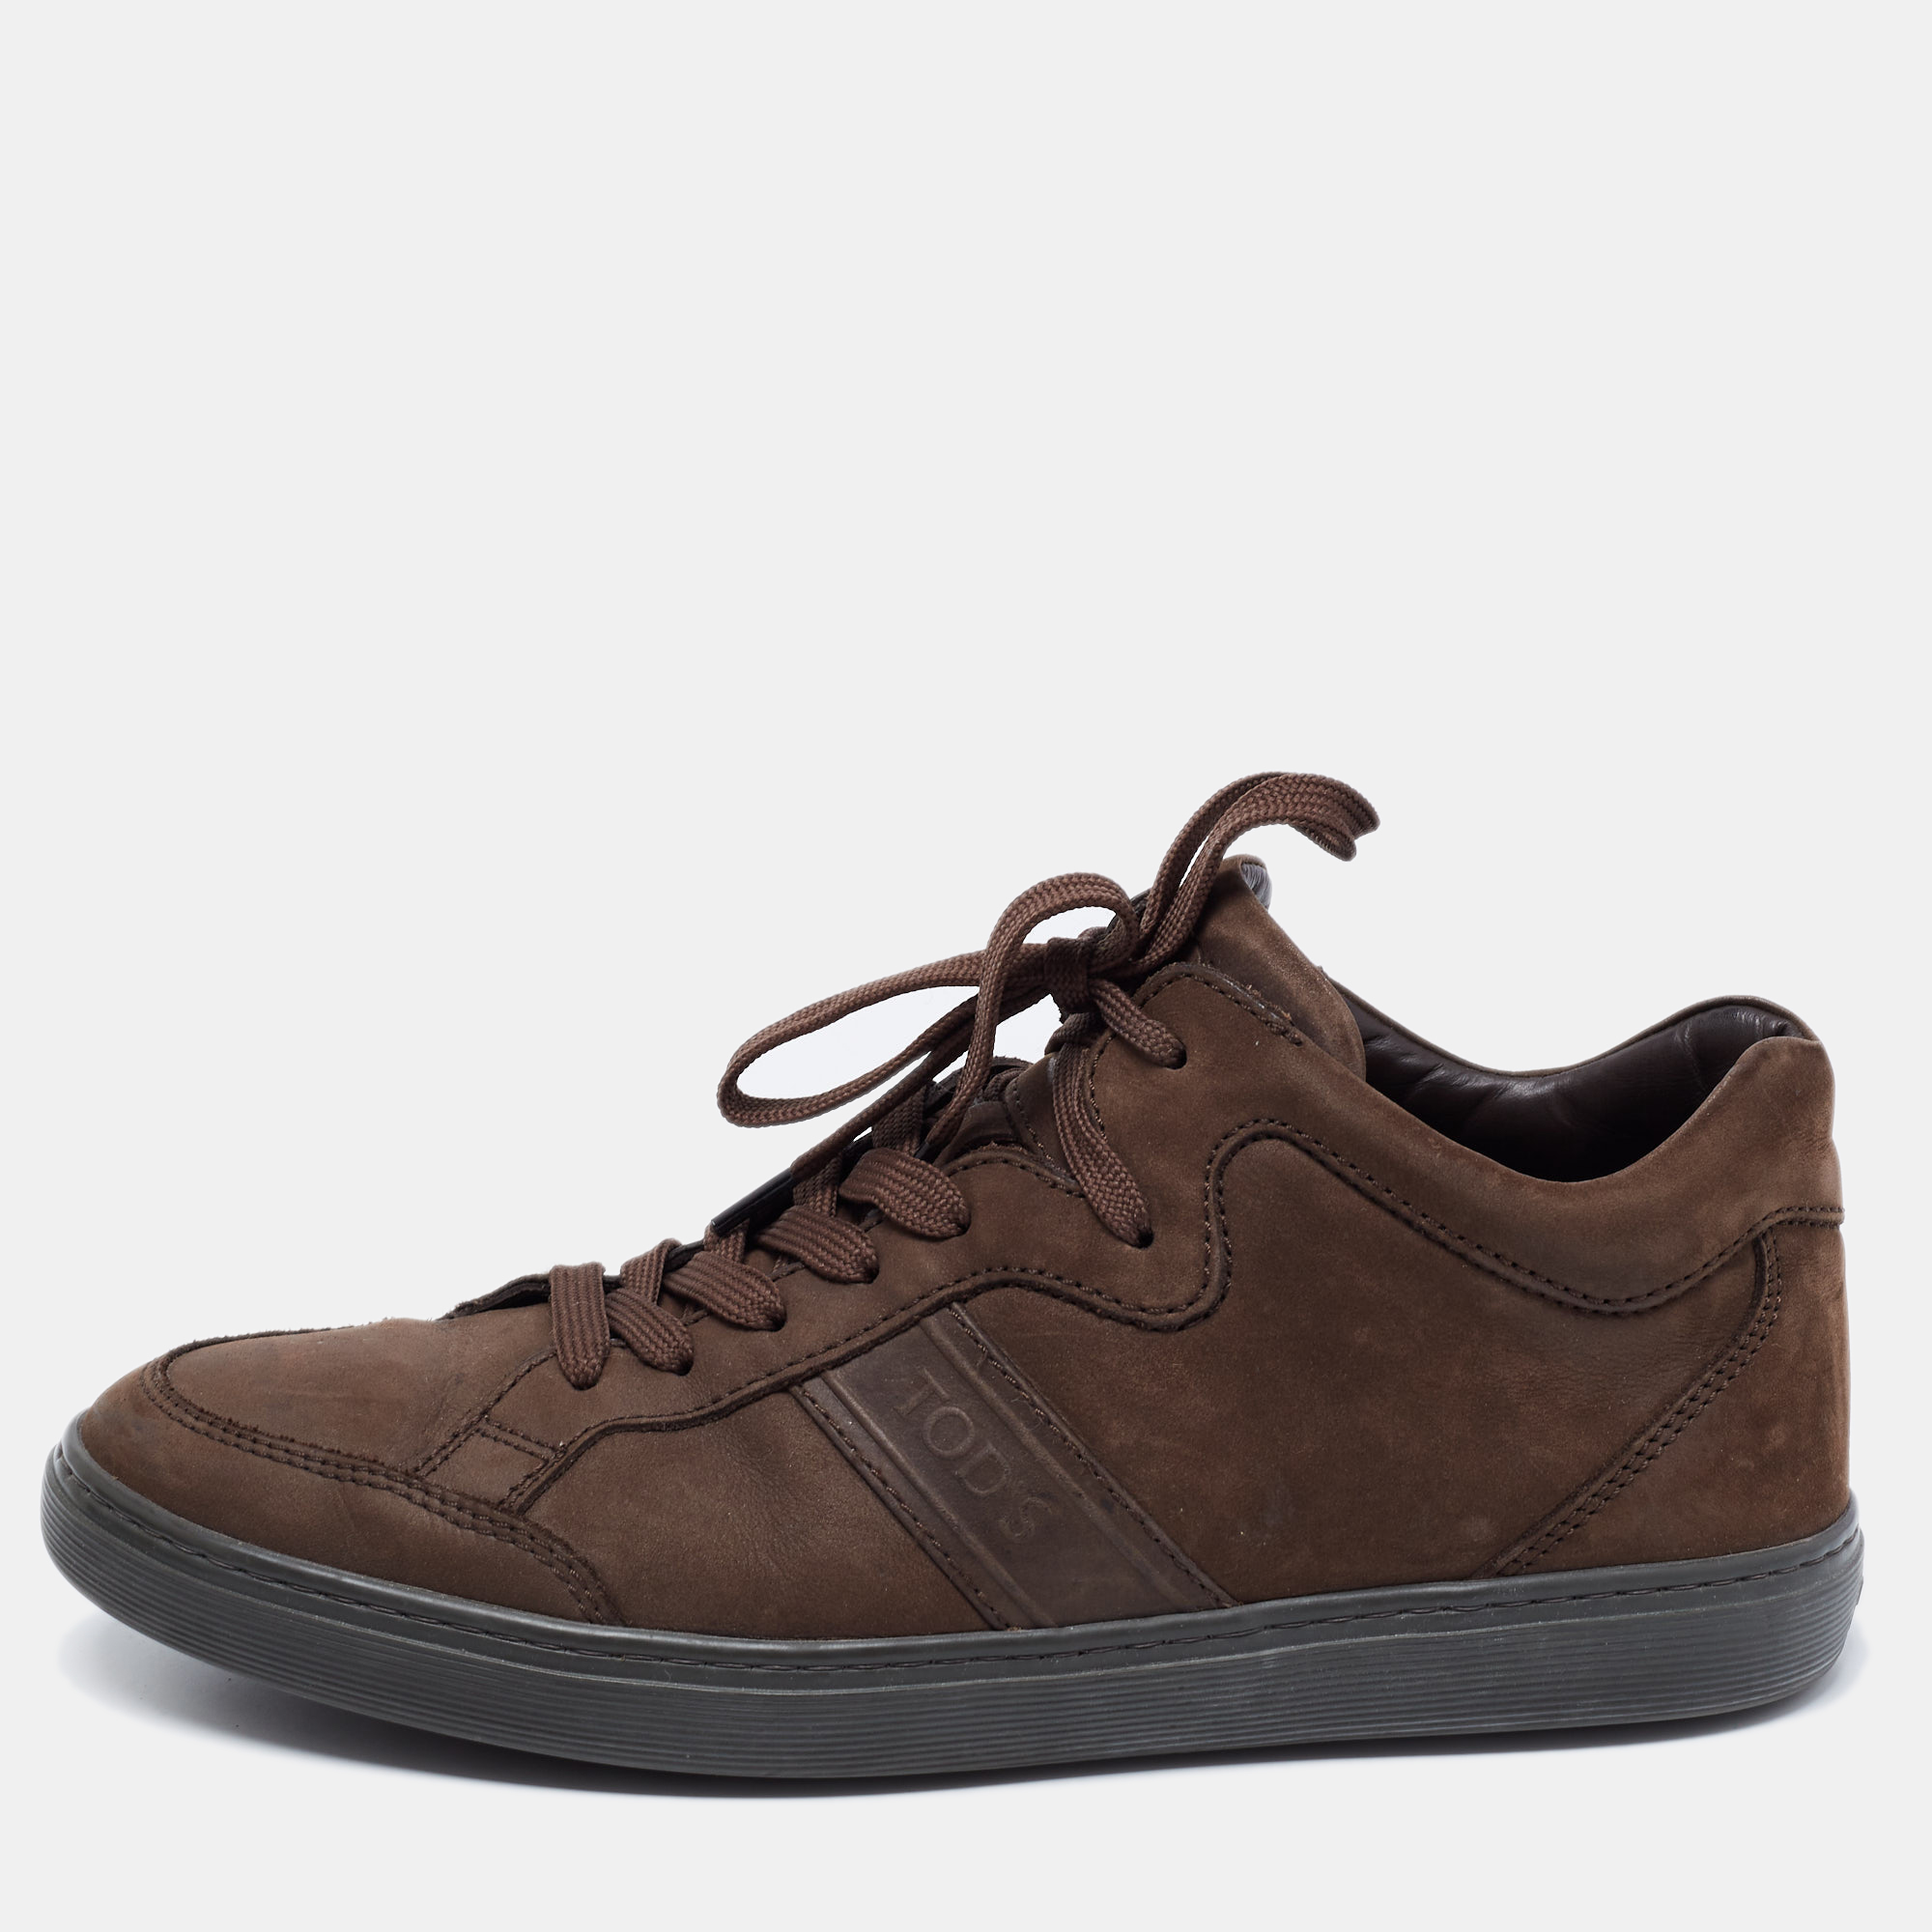 These sneakers from the House of Tods are super sturdy stunning and stylish. They are crafted from brown Nubuck leather on the exterior and showcase lace up fastenings on the vamps. Add these trendy sneakers to your collection and flaunt a dapper look.